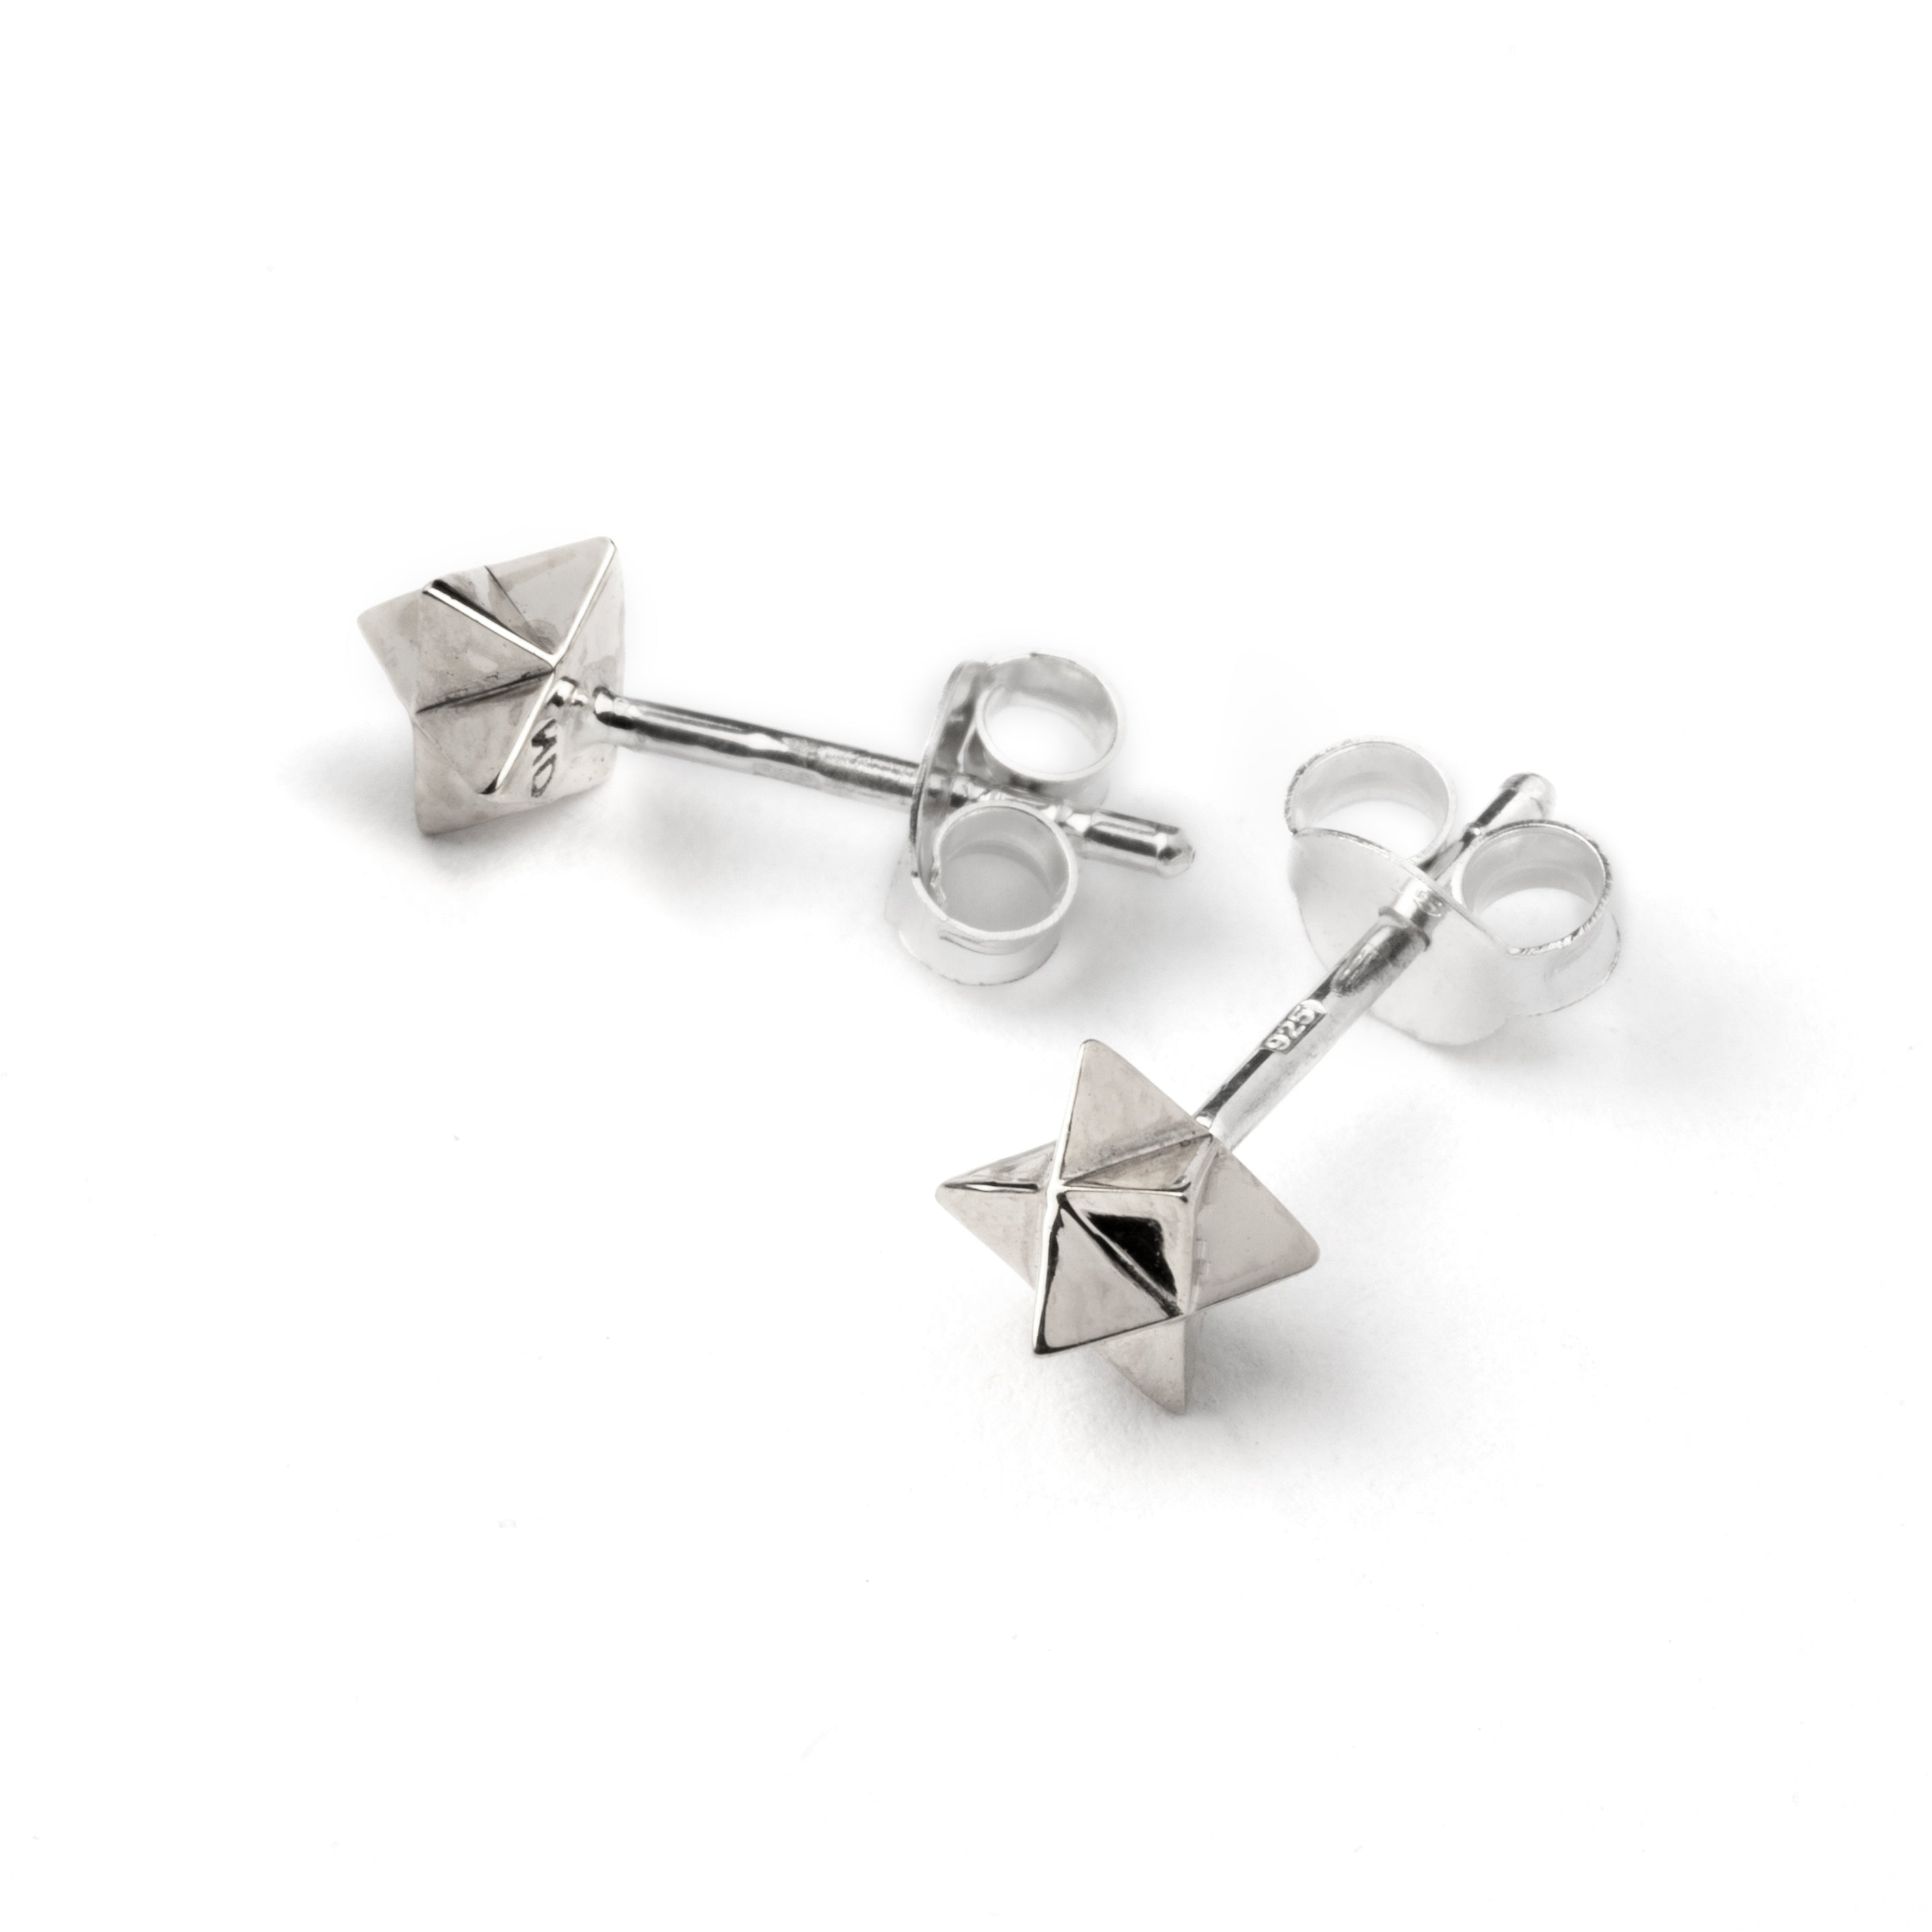 Silver Merkaba Ear Studs front and back view